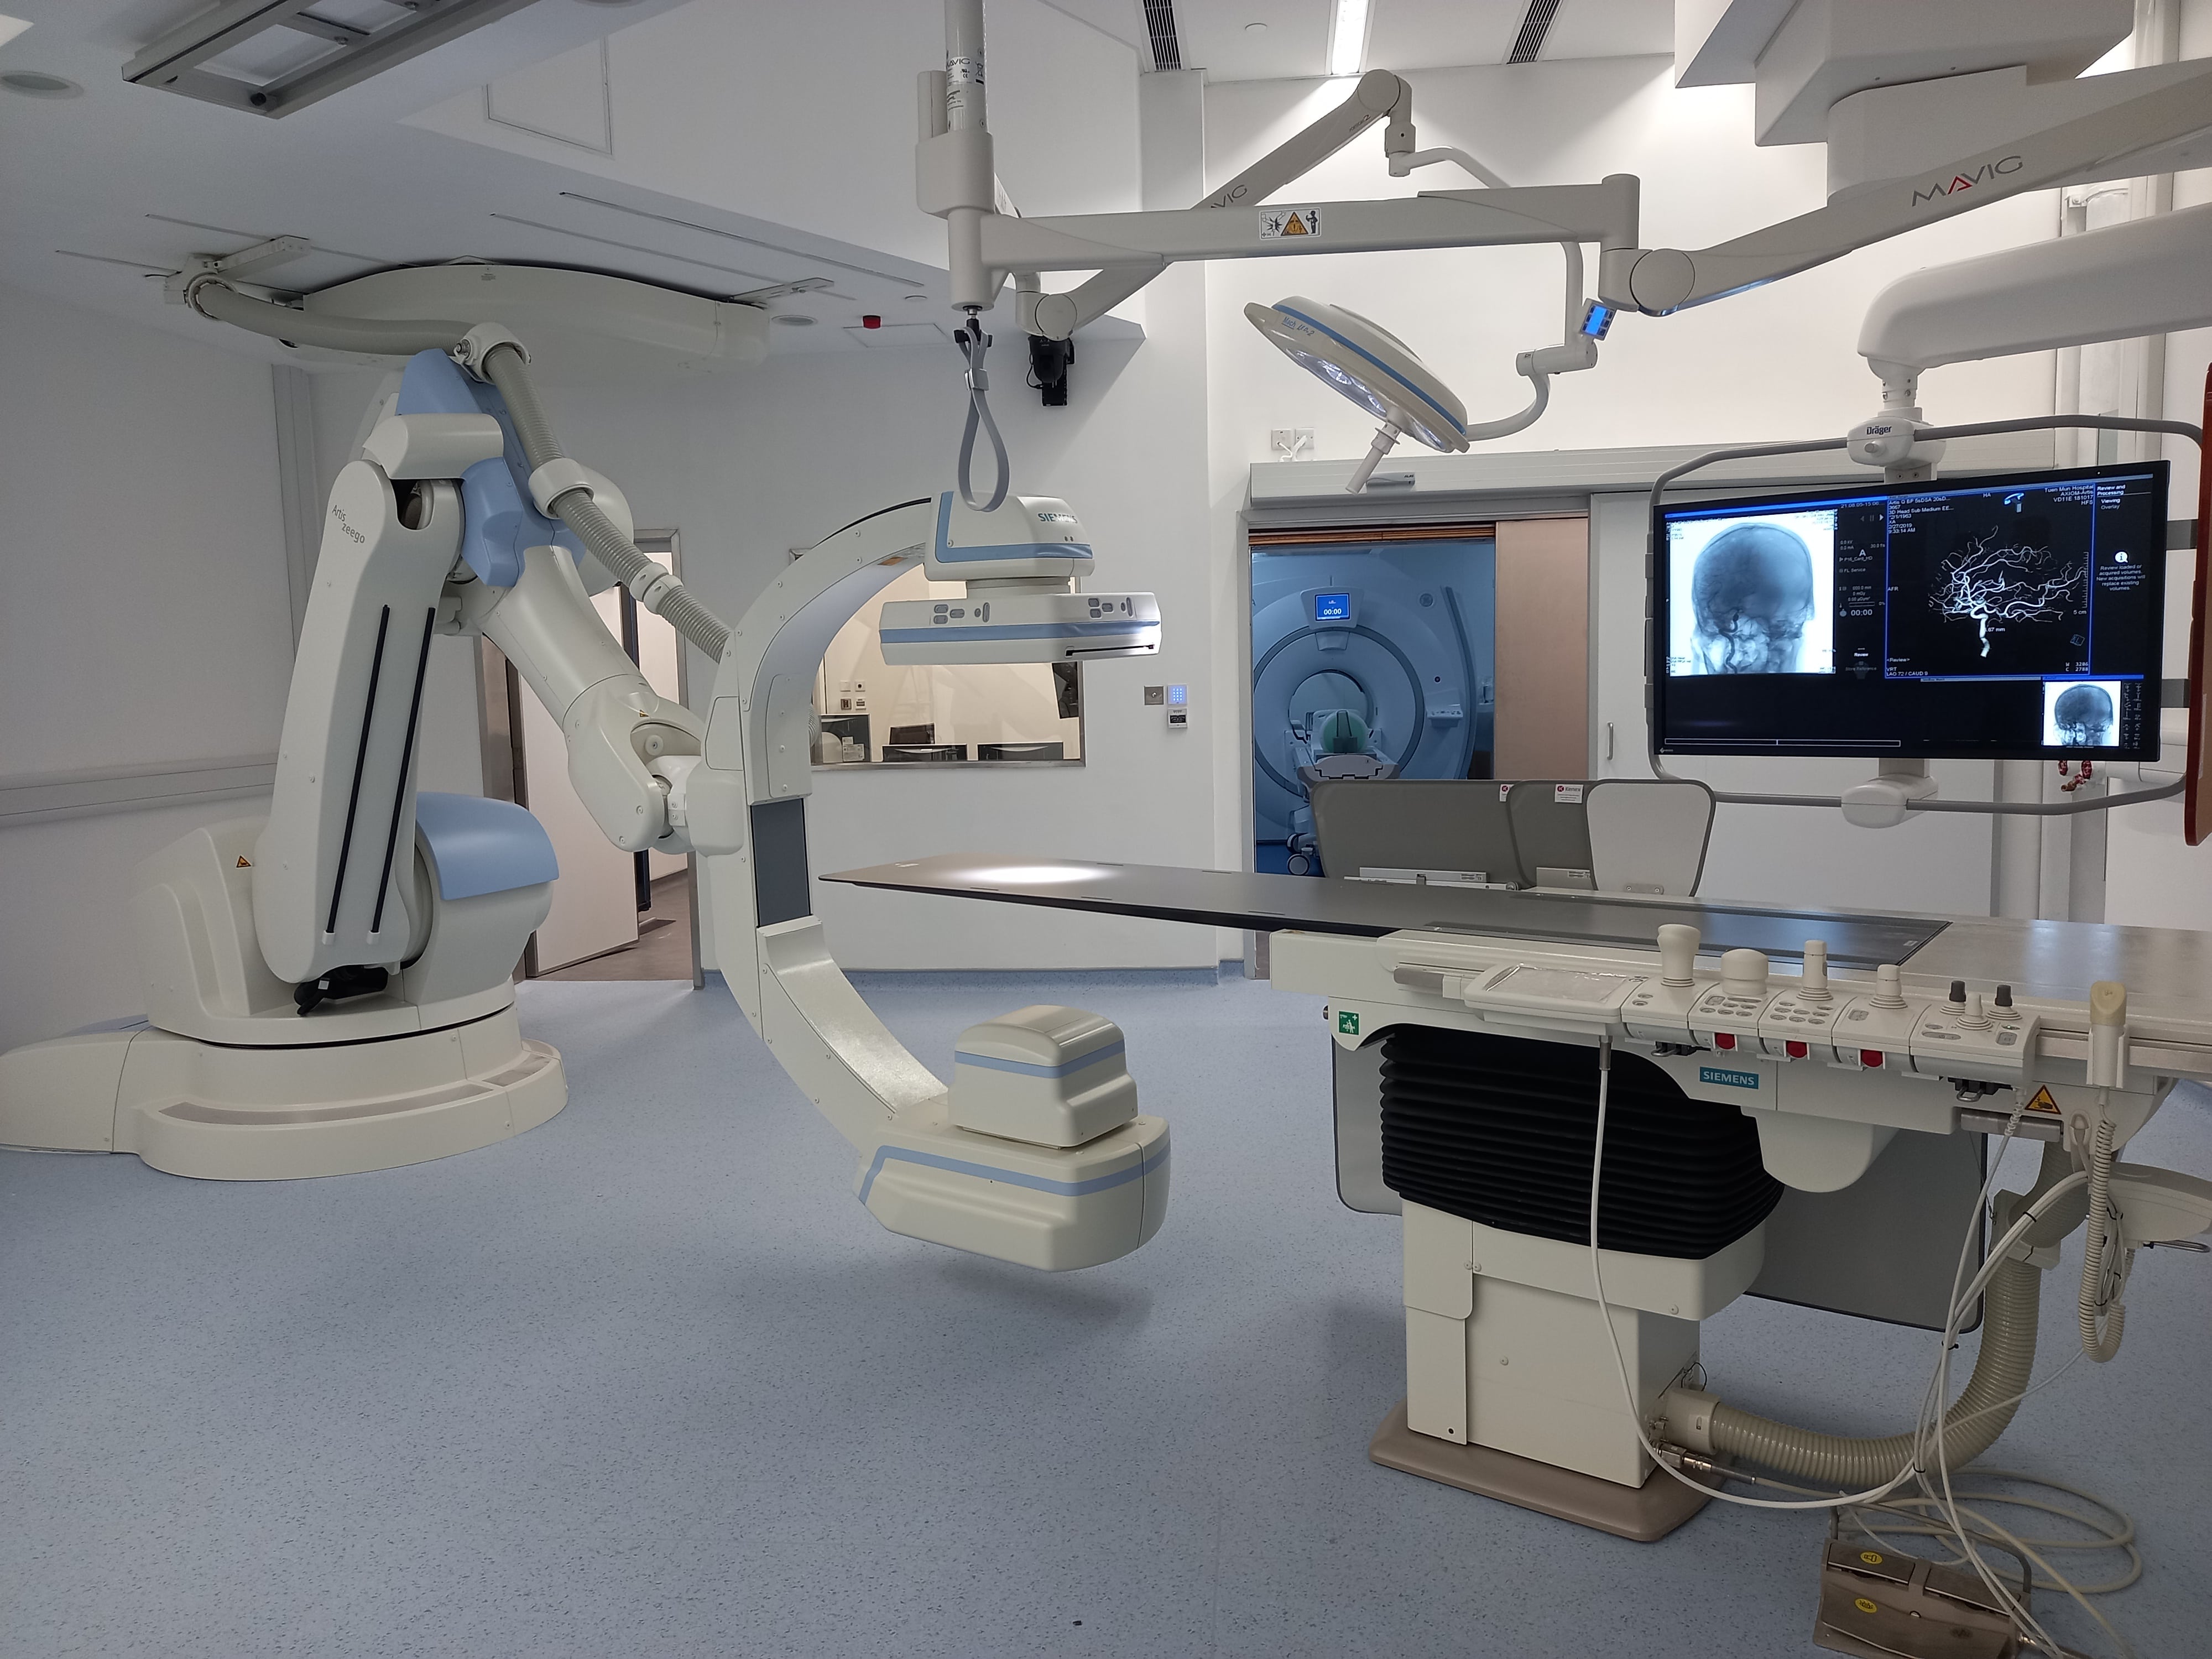 The Hybrid Operating Room of MRC Lab equipped with MRI and Robotic-Assisted C-Arm X-Ray Imaging System (Artis Zeego) machines is fully dedicated to R&D and pre-clinical evaluations of new surgical robots and medical devices via live animal and cadaveric studies. 